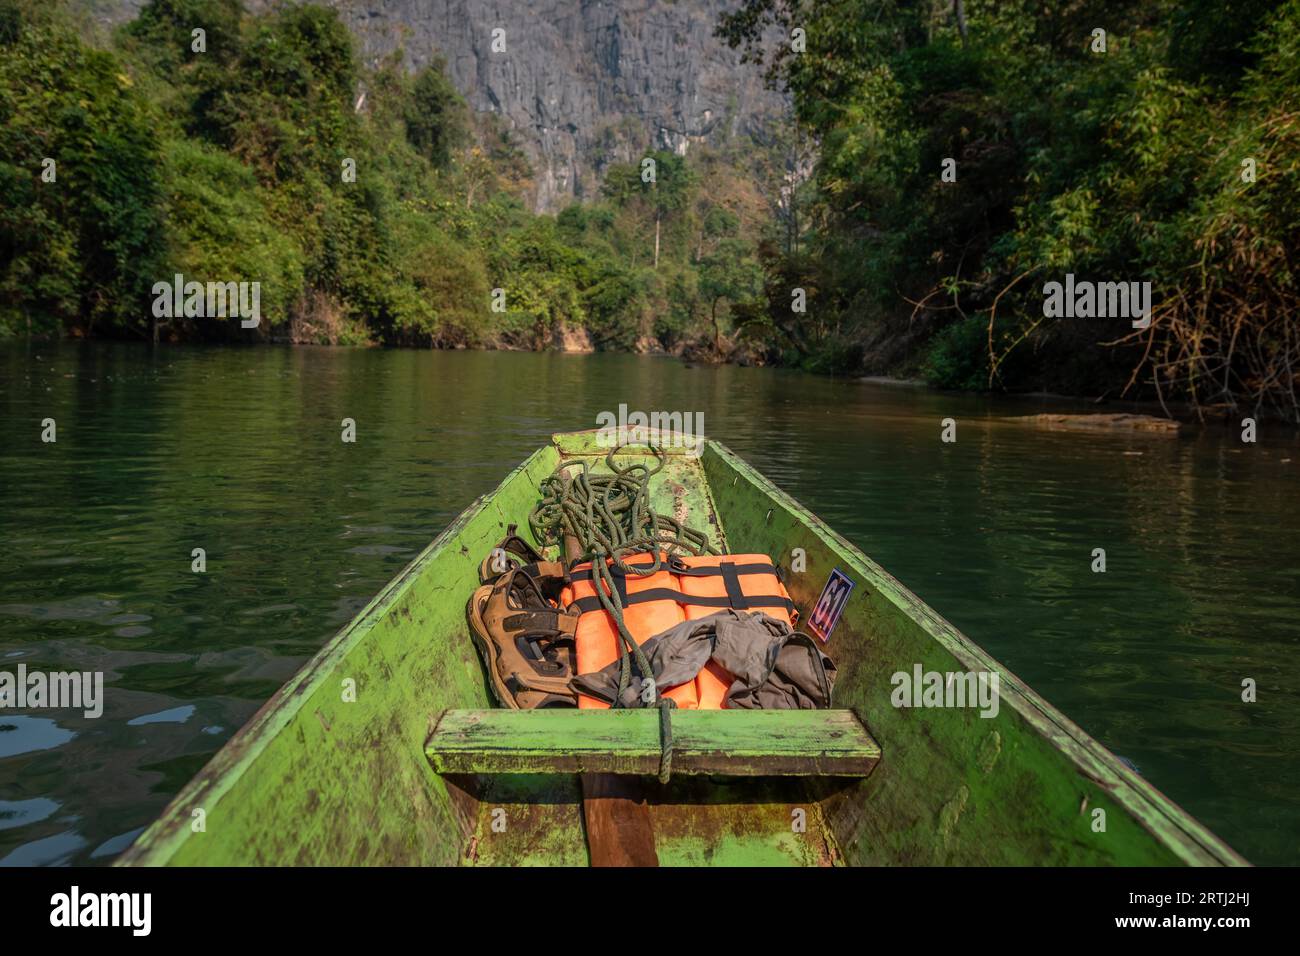 Wooden boat with brown and orange life vests, Konglor Cave, Thakhek, Laos Stock Photo